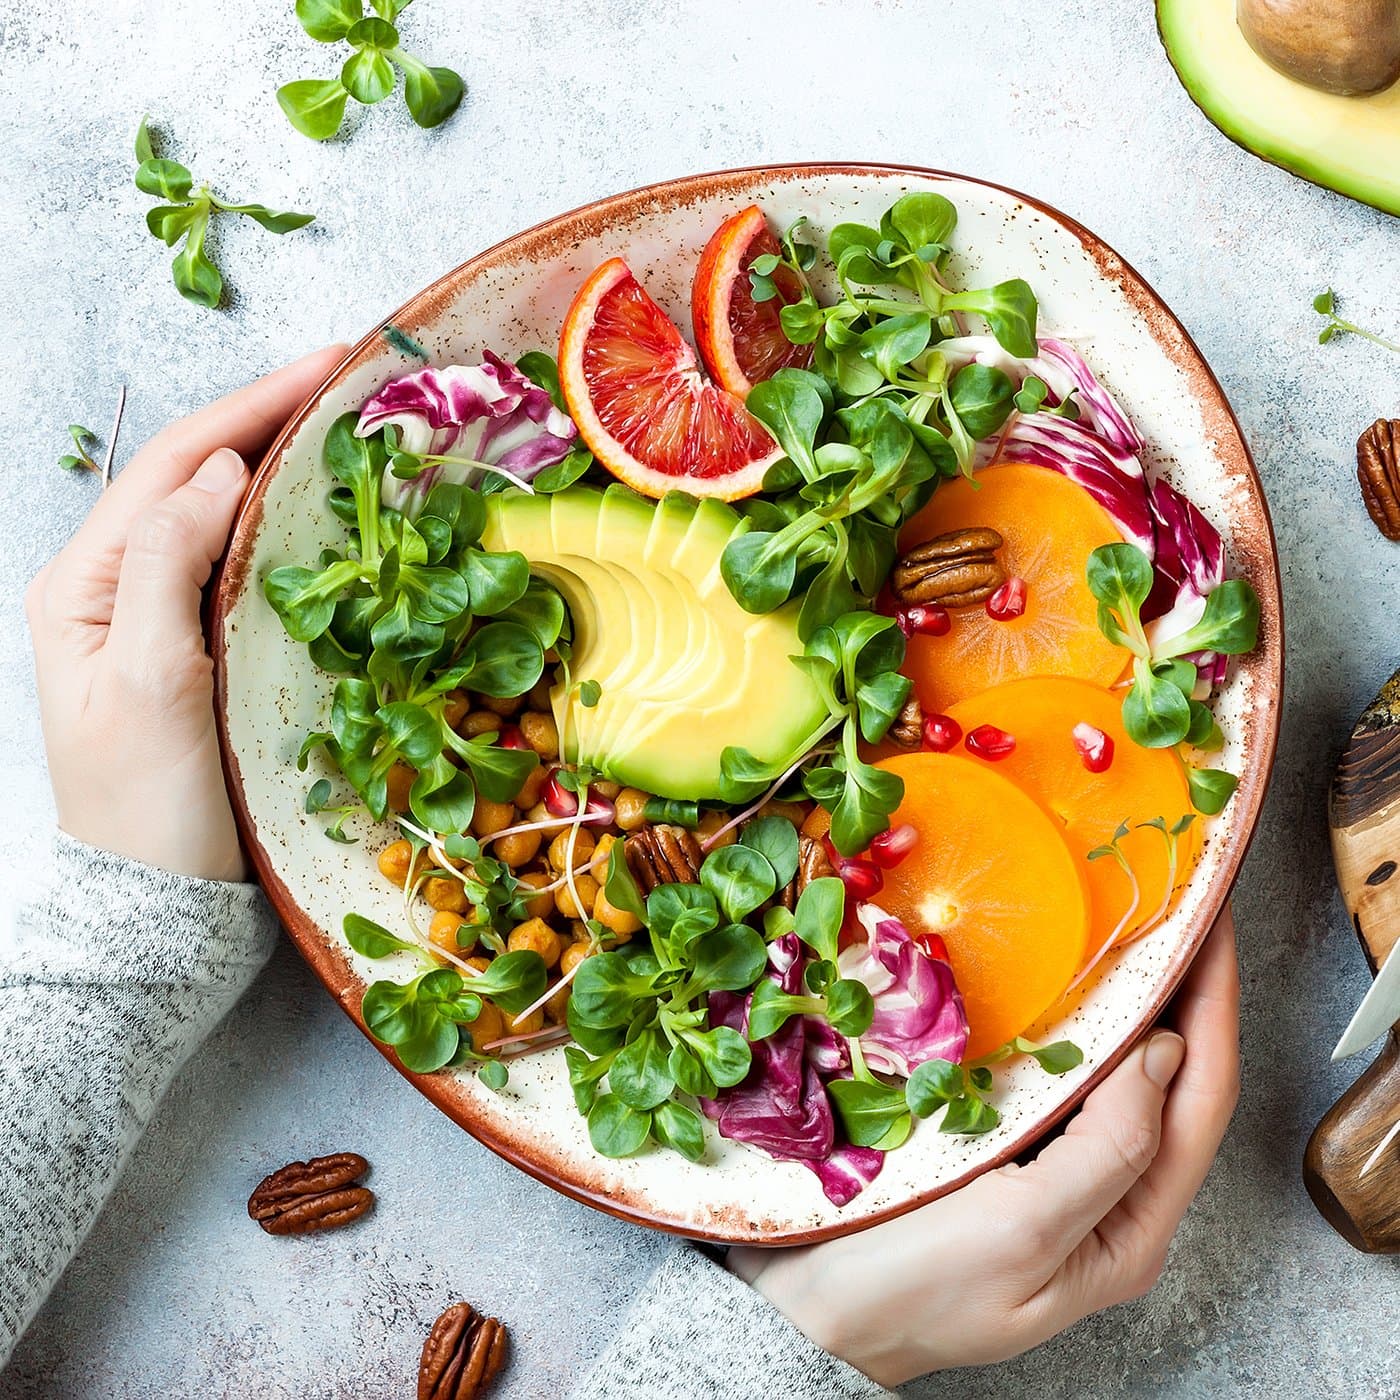 Top Plant-Based Food Trends for 2020